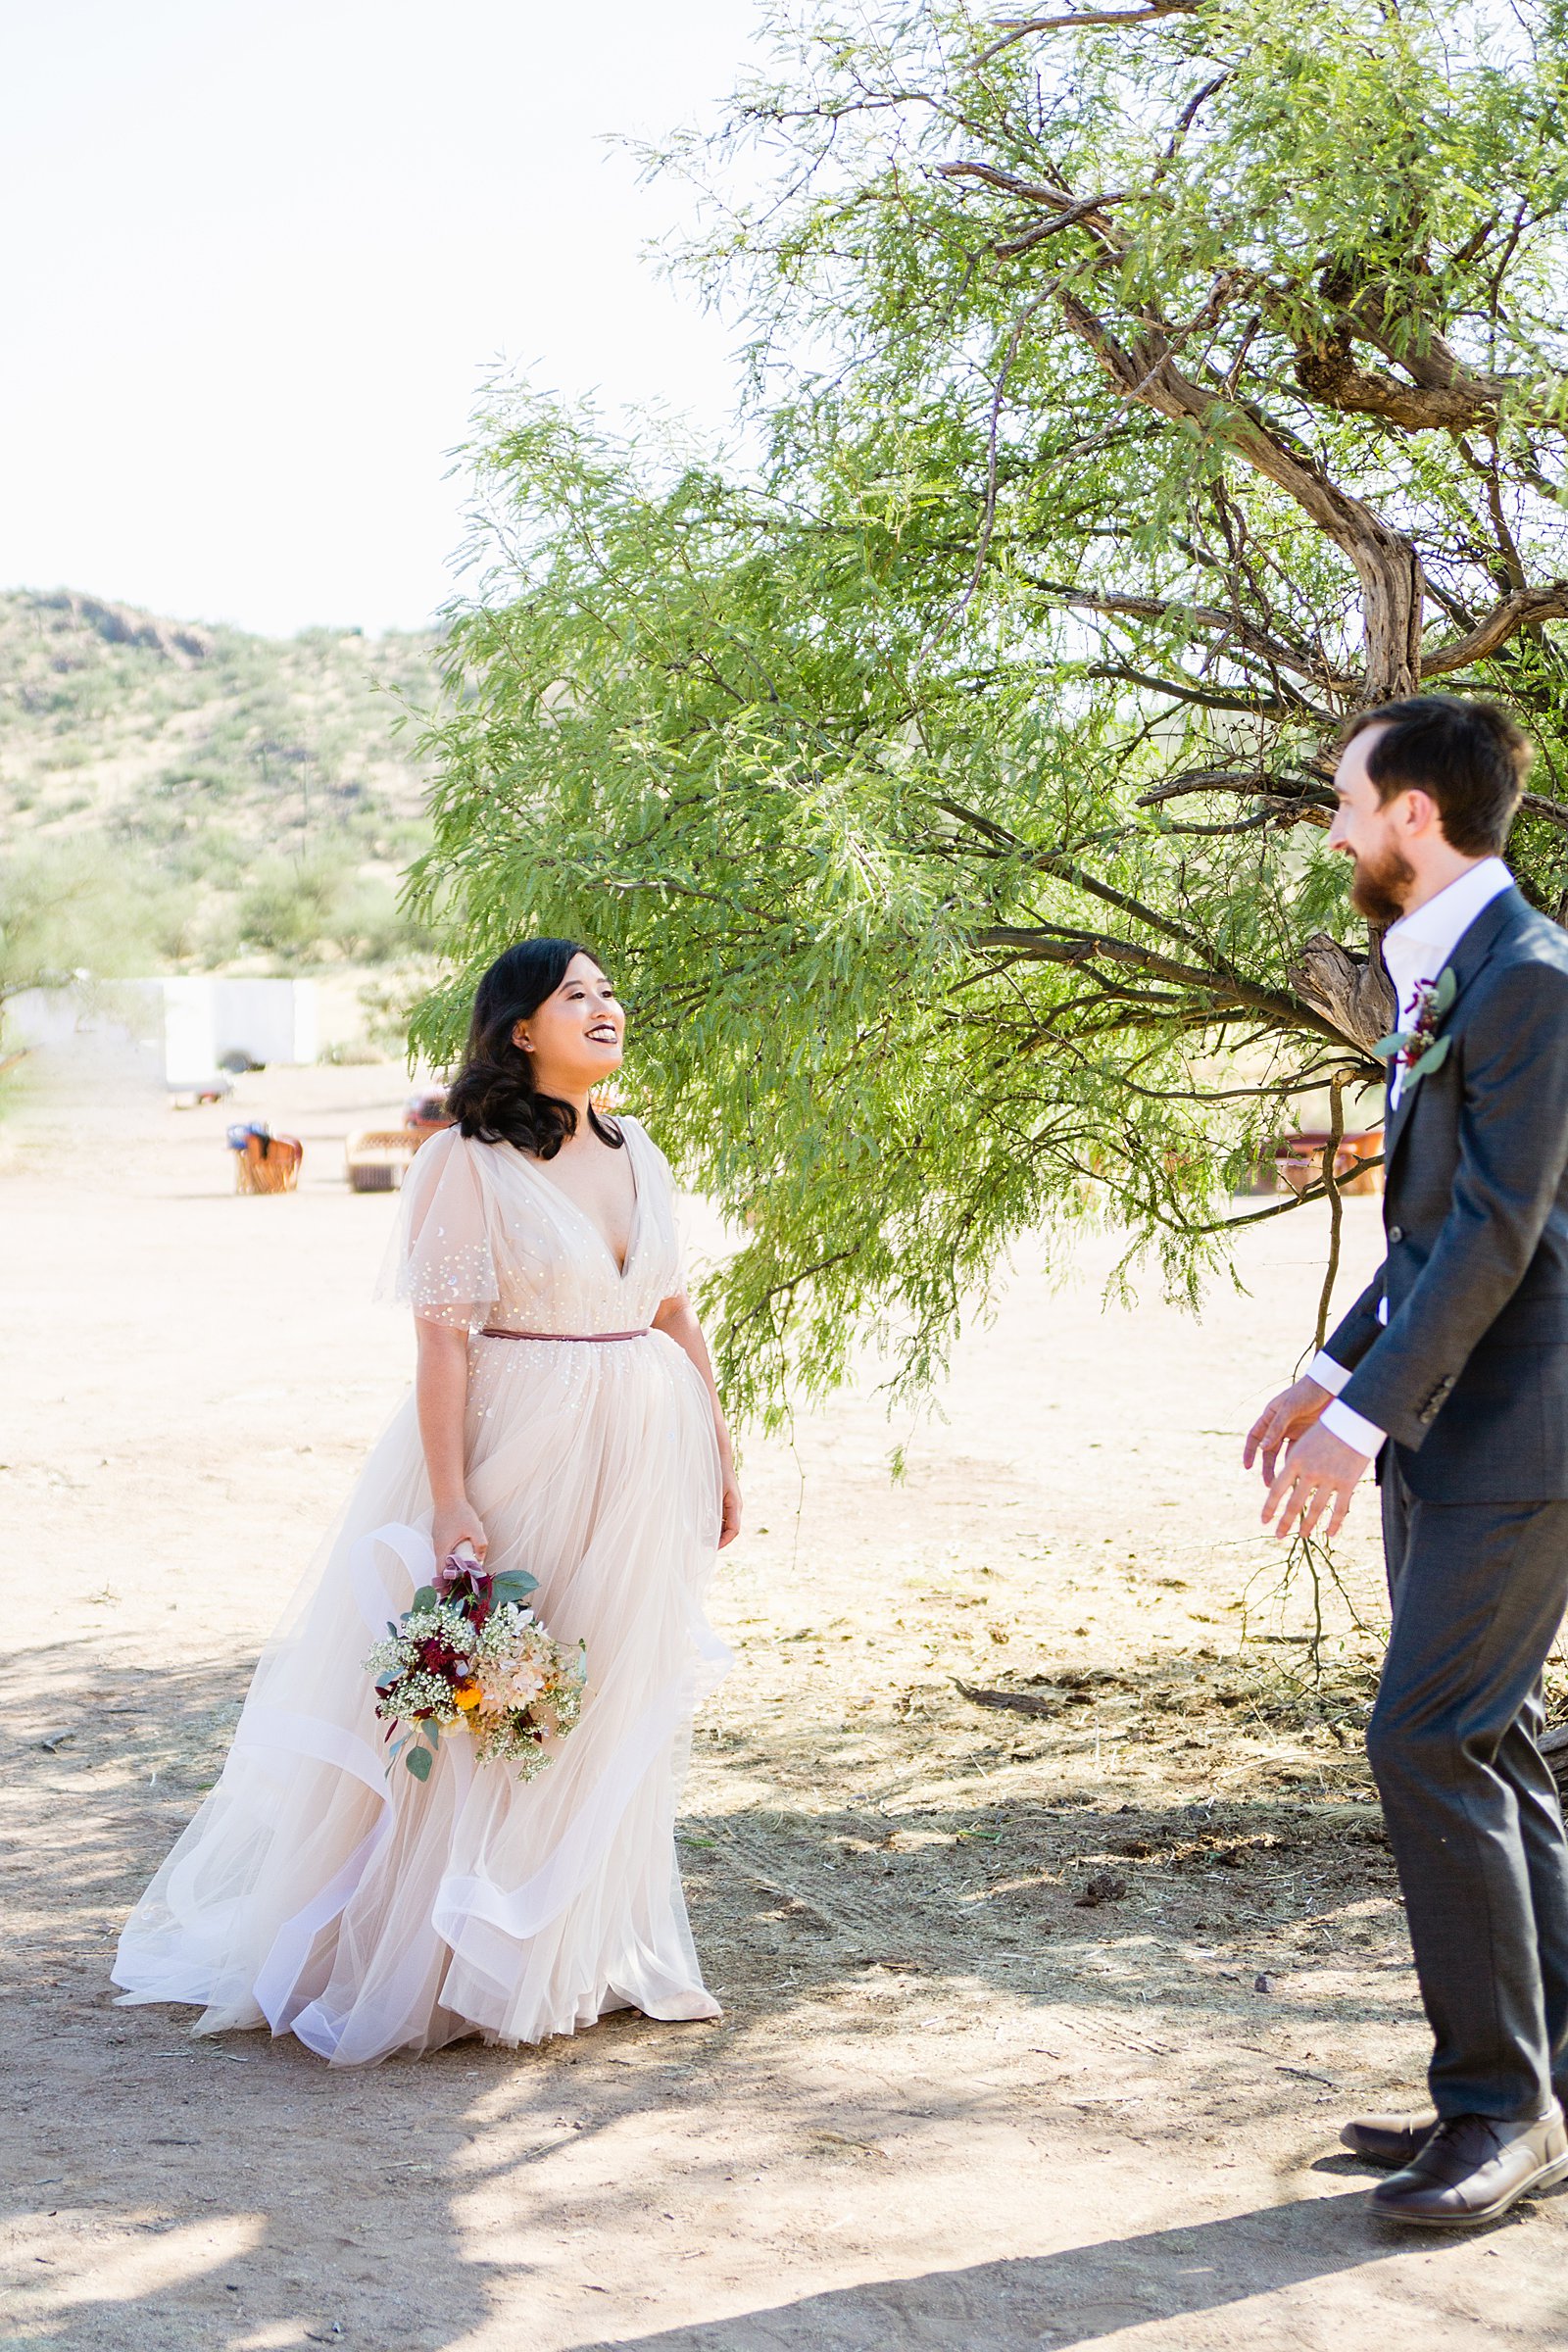 Bride and Groom's first look at Cloth and Flame Superstition Mountain by Phoenix wedding photographer PMA Photography.